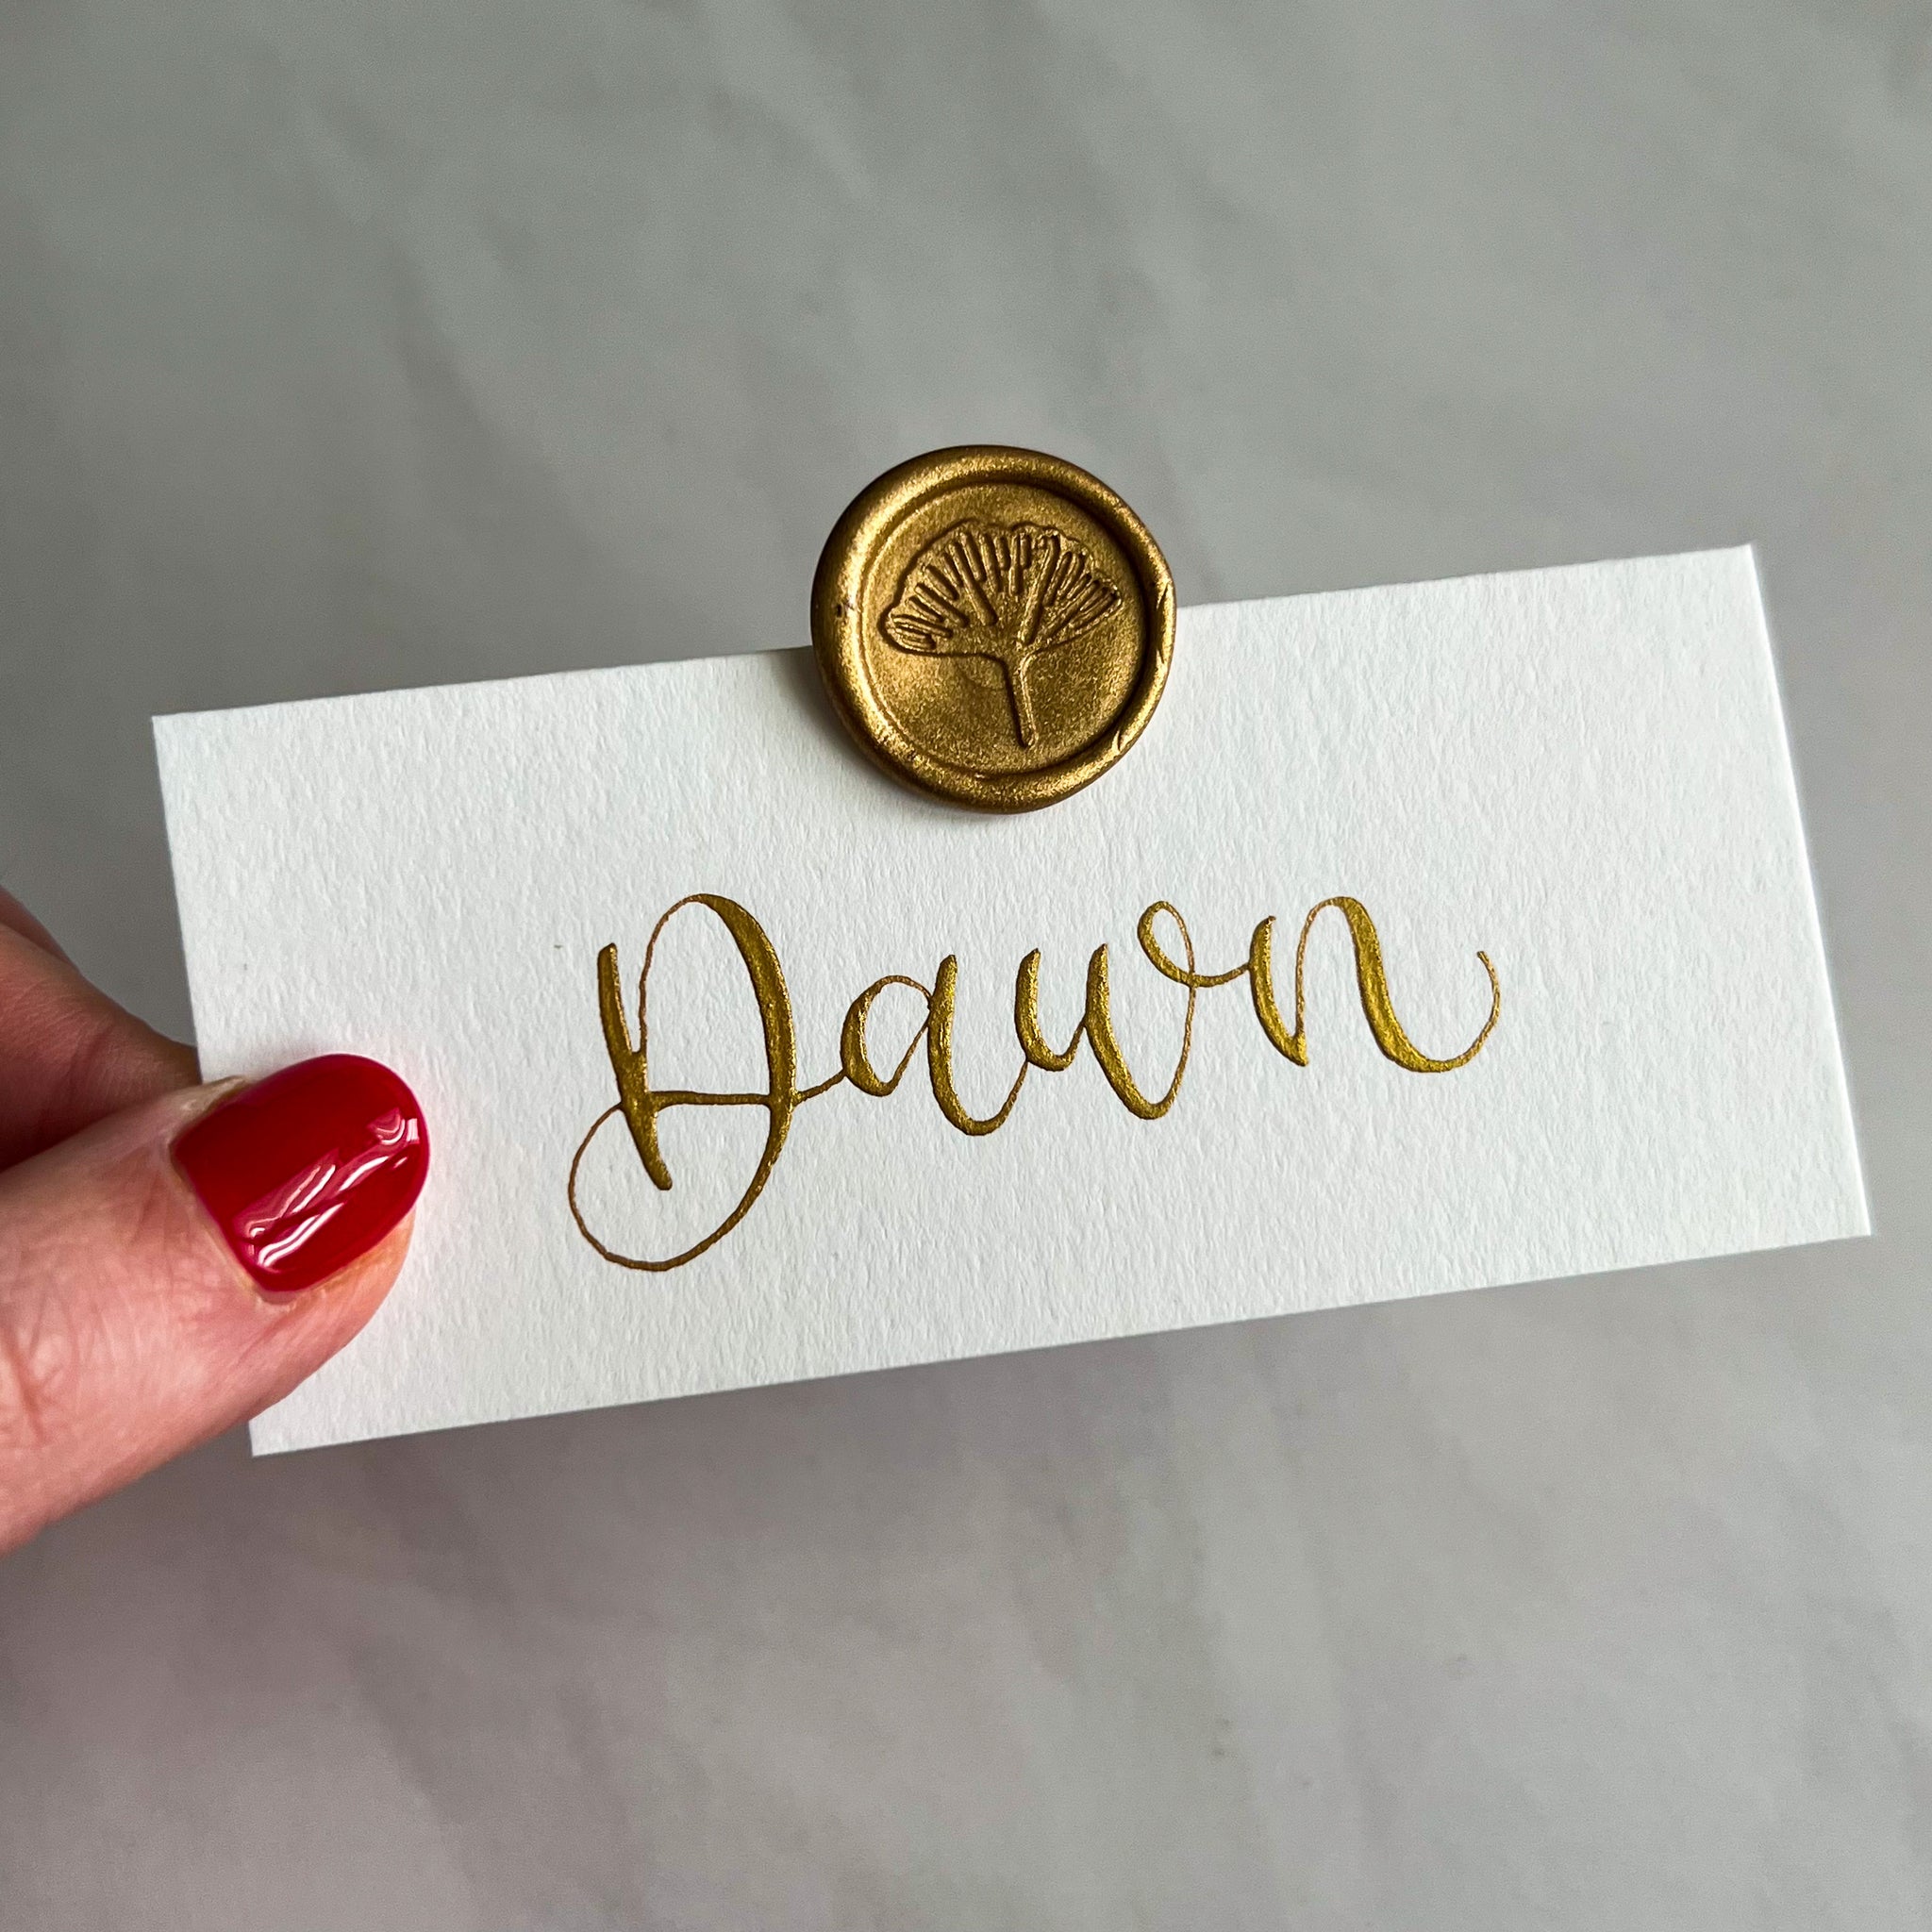 White place cards with wax seal